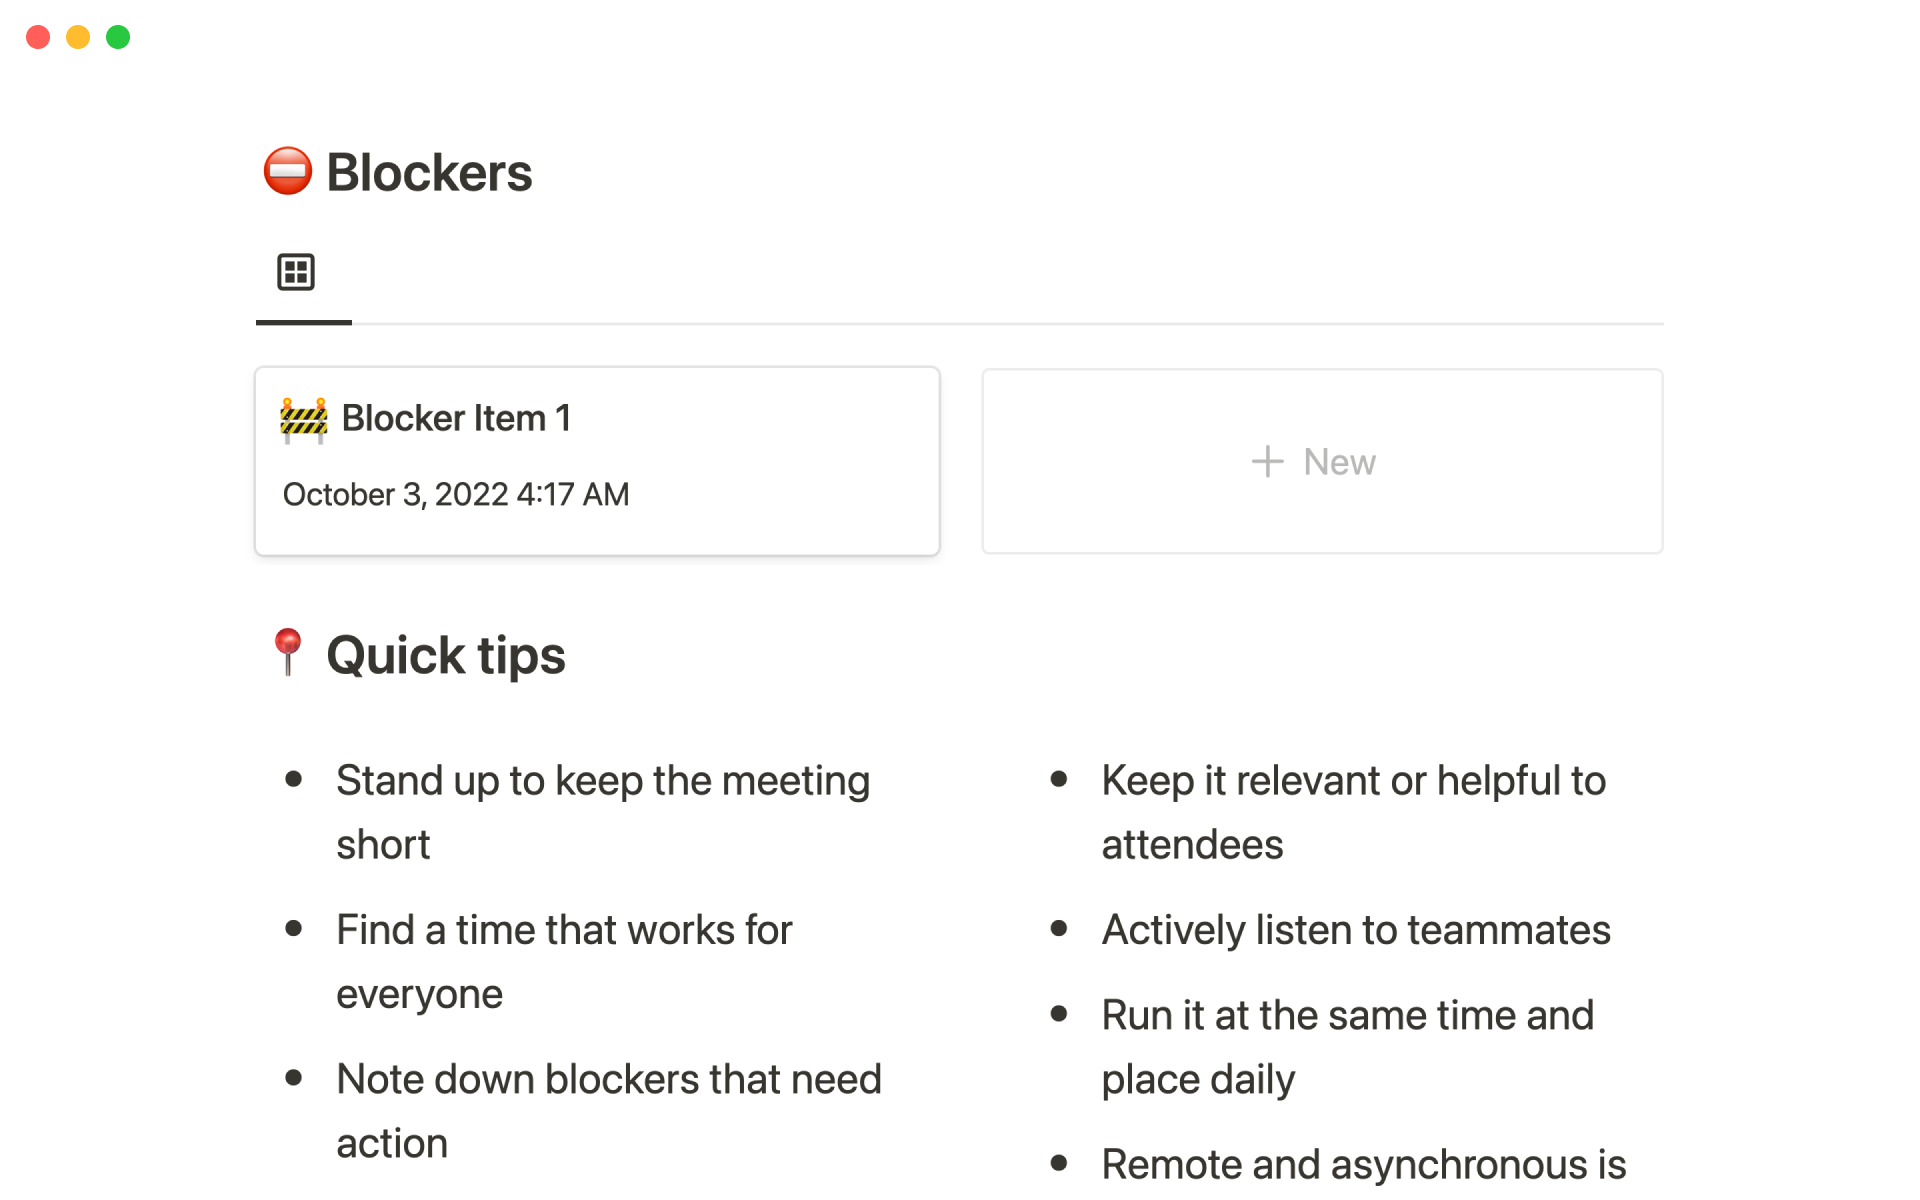 Record daily standup notes and work on blockers together.